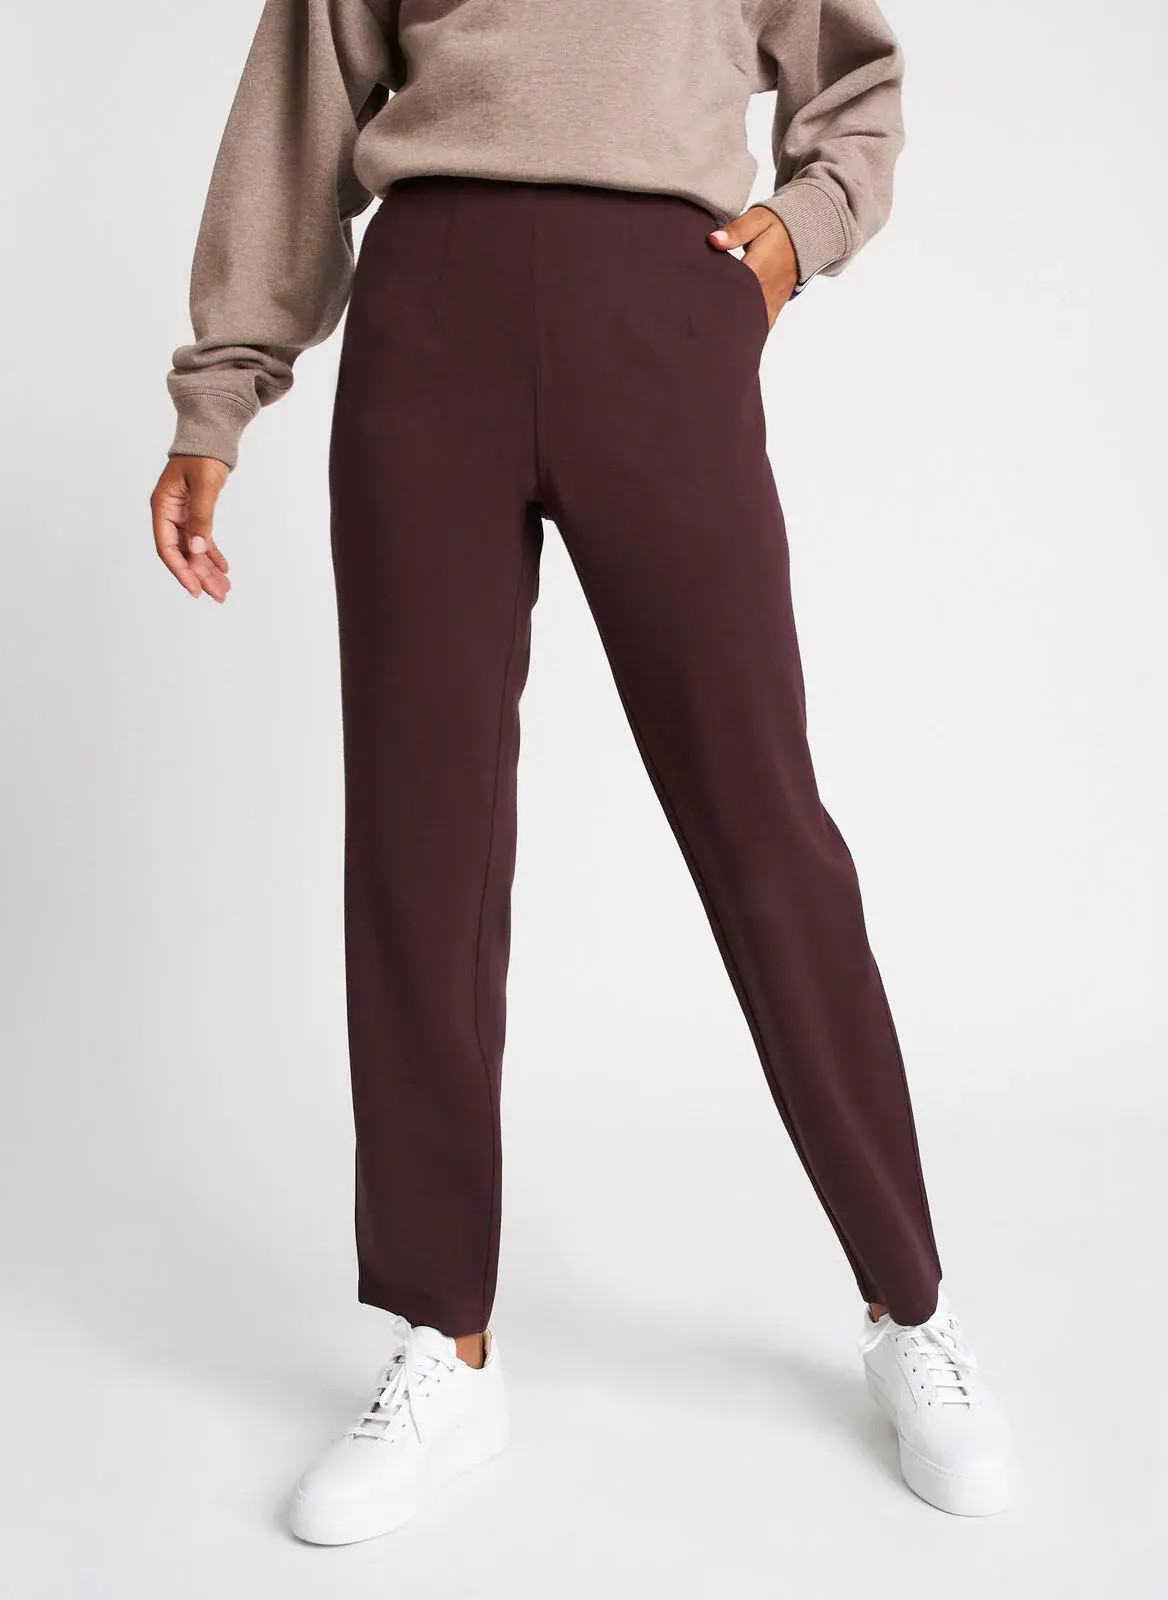 Kit And Ace Serenity Double Knit Pants. 1